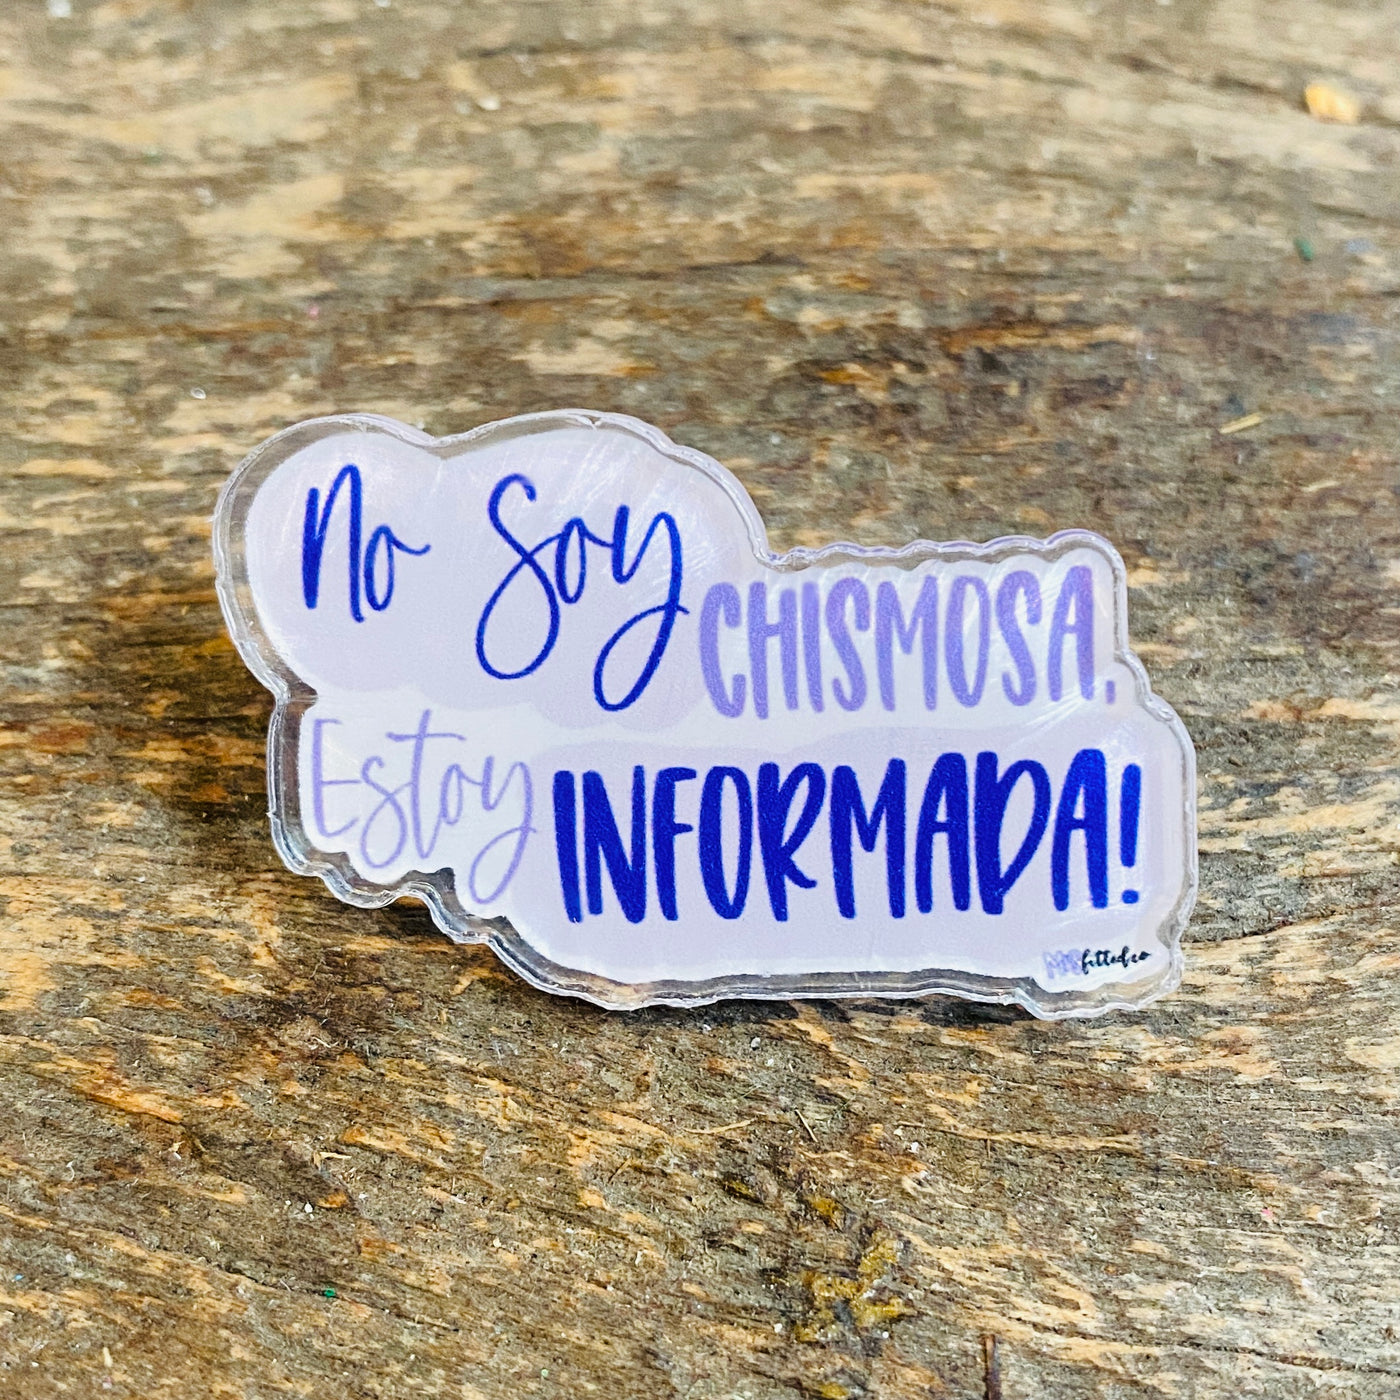 Pastel blue pin that reads "No soy chismosa, soy informada!" shown on a wooden table. 